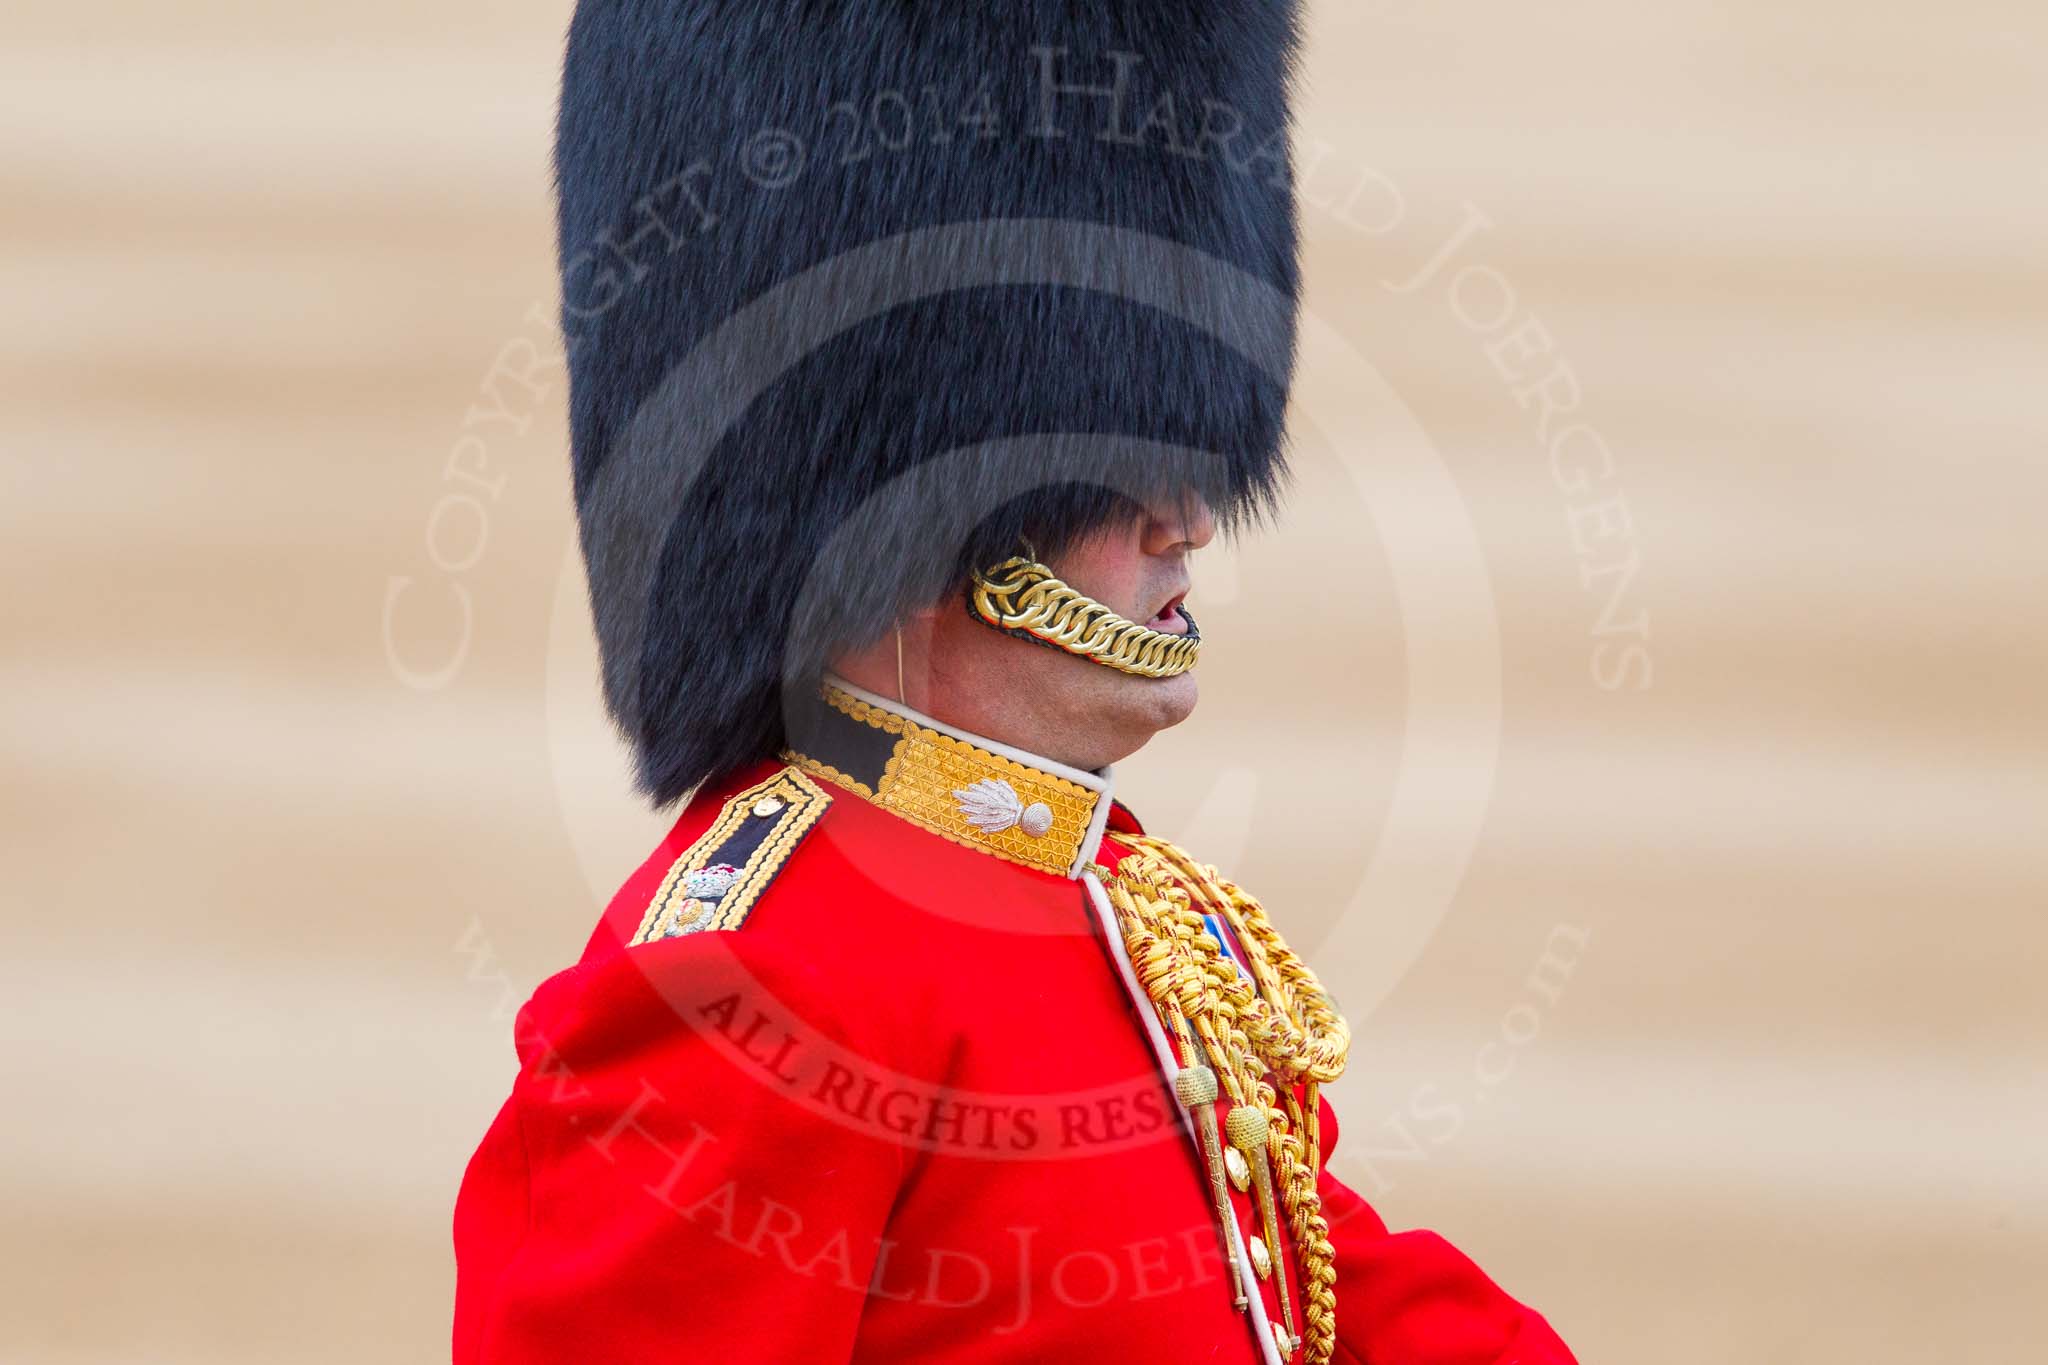 Trooping the Colour 2014.
Horse Guards Parade, Westminster,
London SW1A,

United Kingdom,
on 14 June 2014 at 10:58, image #337